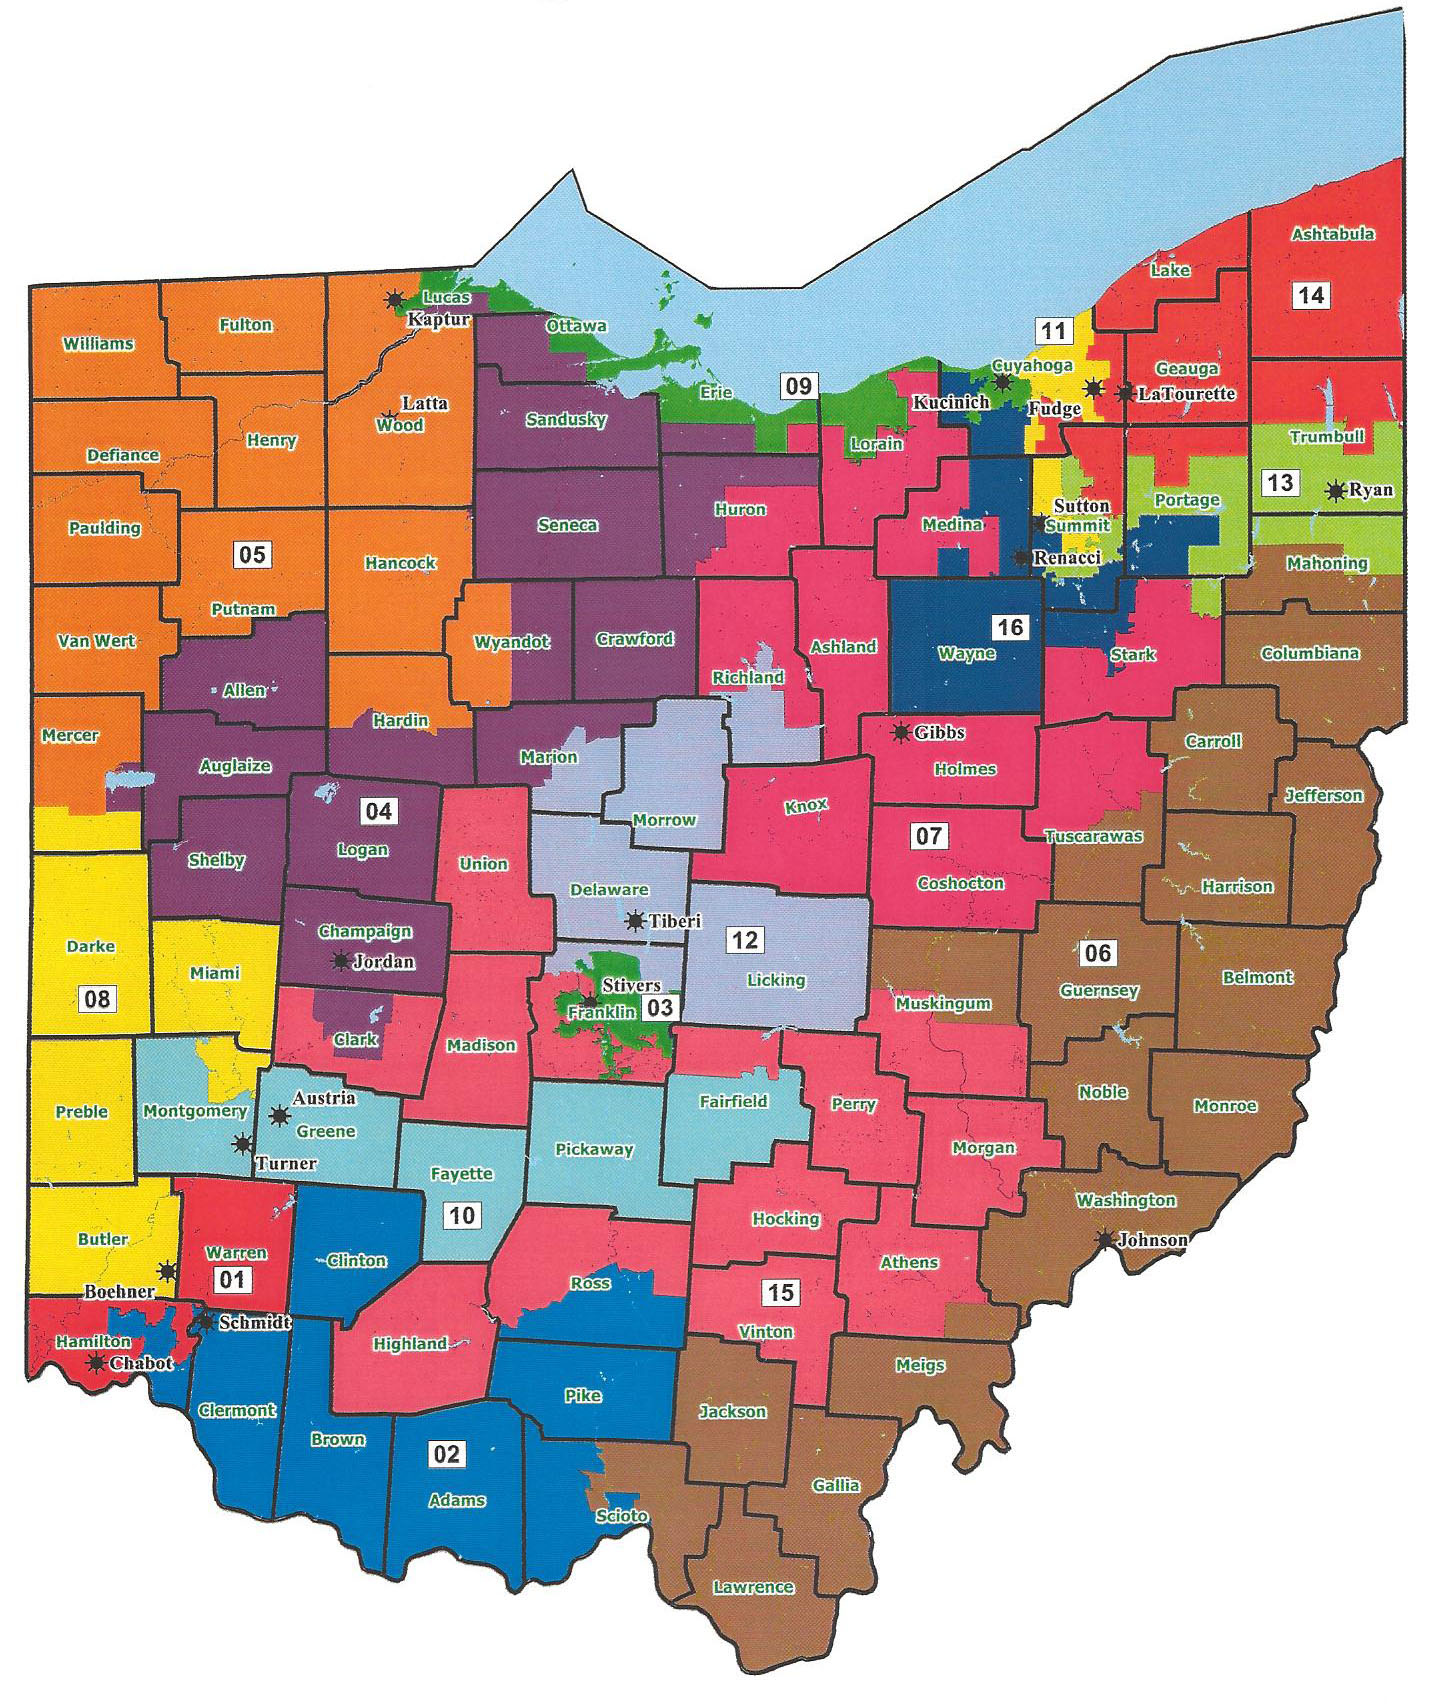 Republican-drawn congressional map clears Ohio House amid Democrats' complaints - The ...